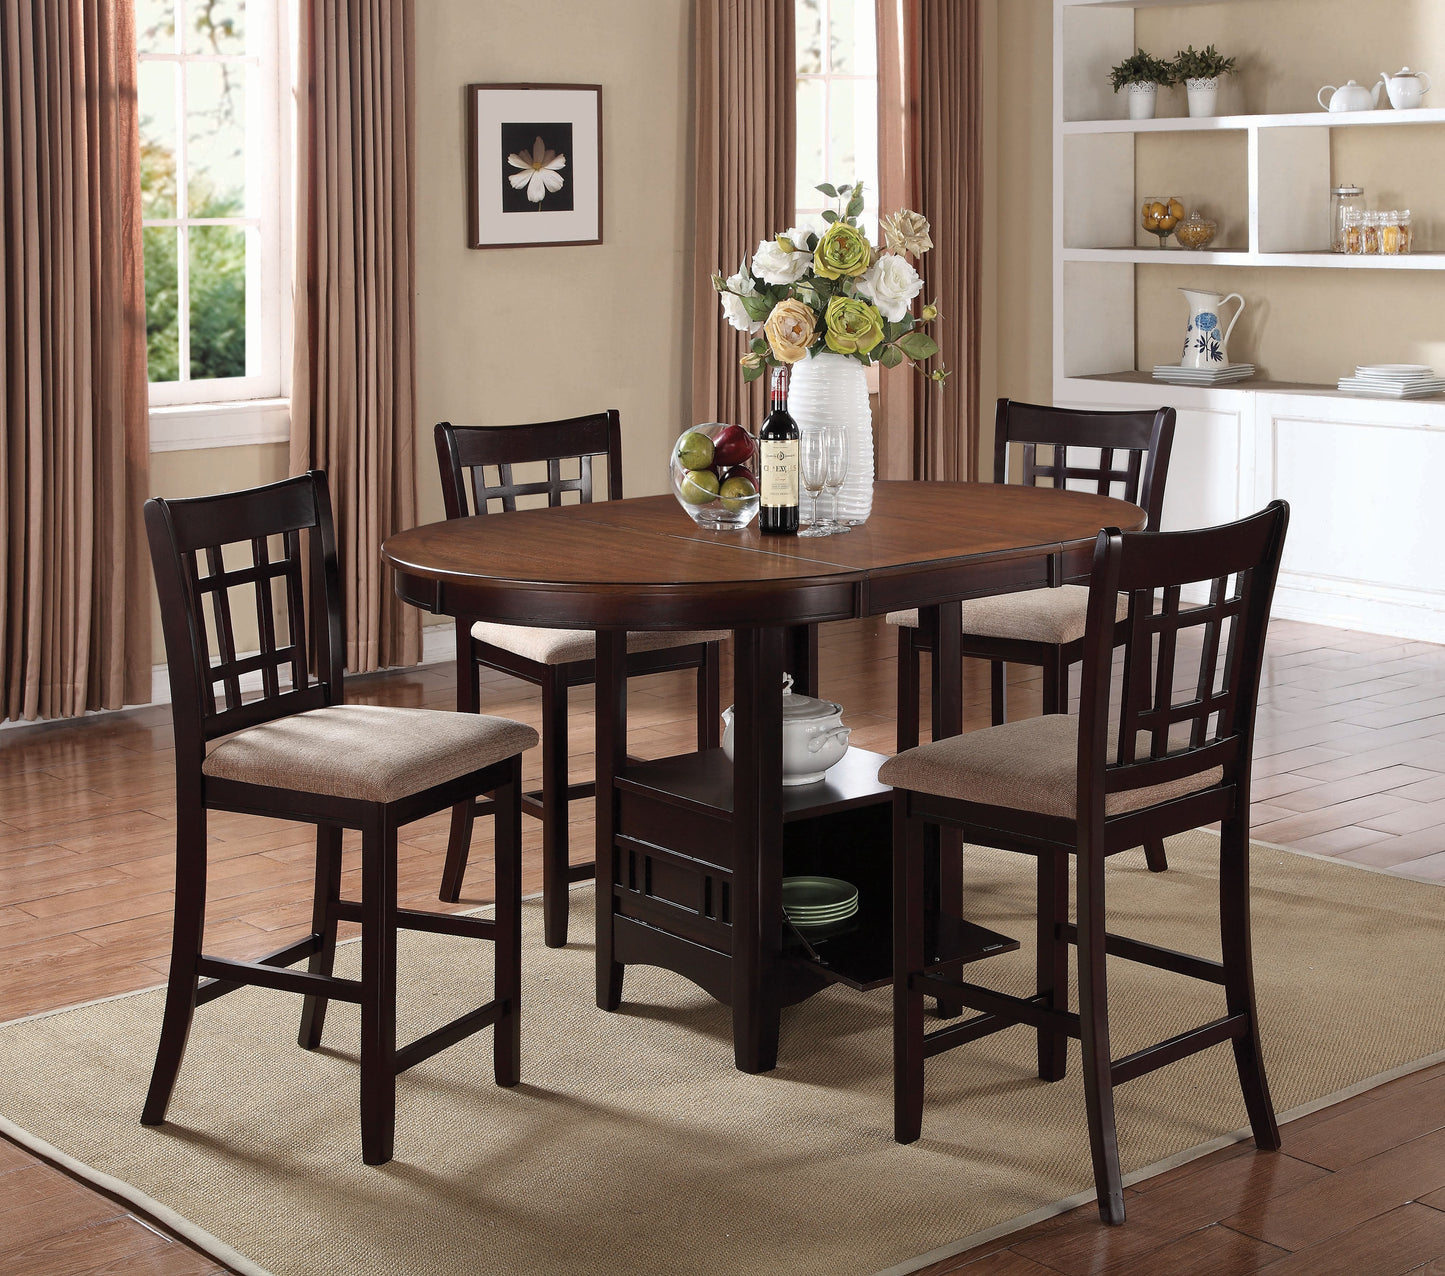 Lavon 5-piece Counter Height Dining Room Set Light Chestnut and Espresso